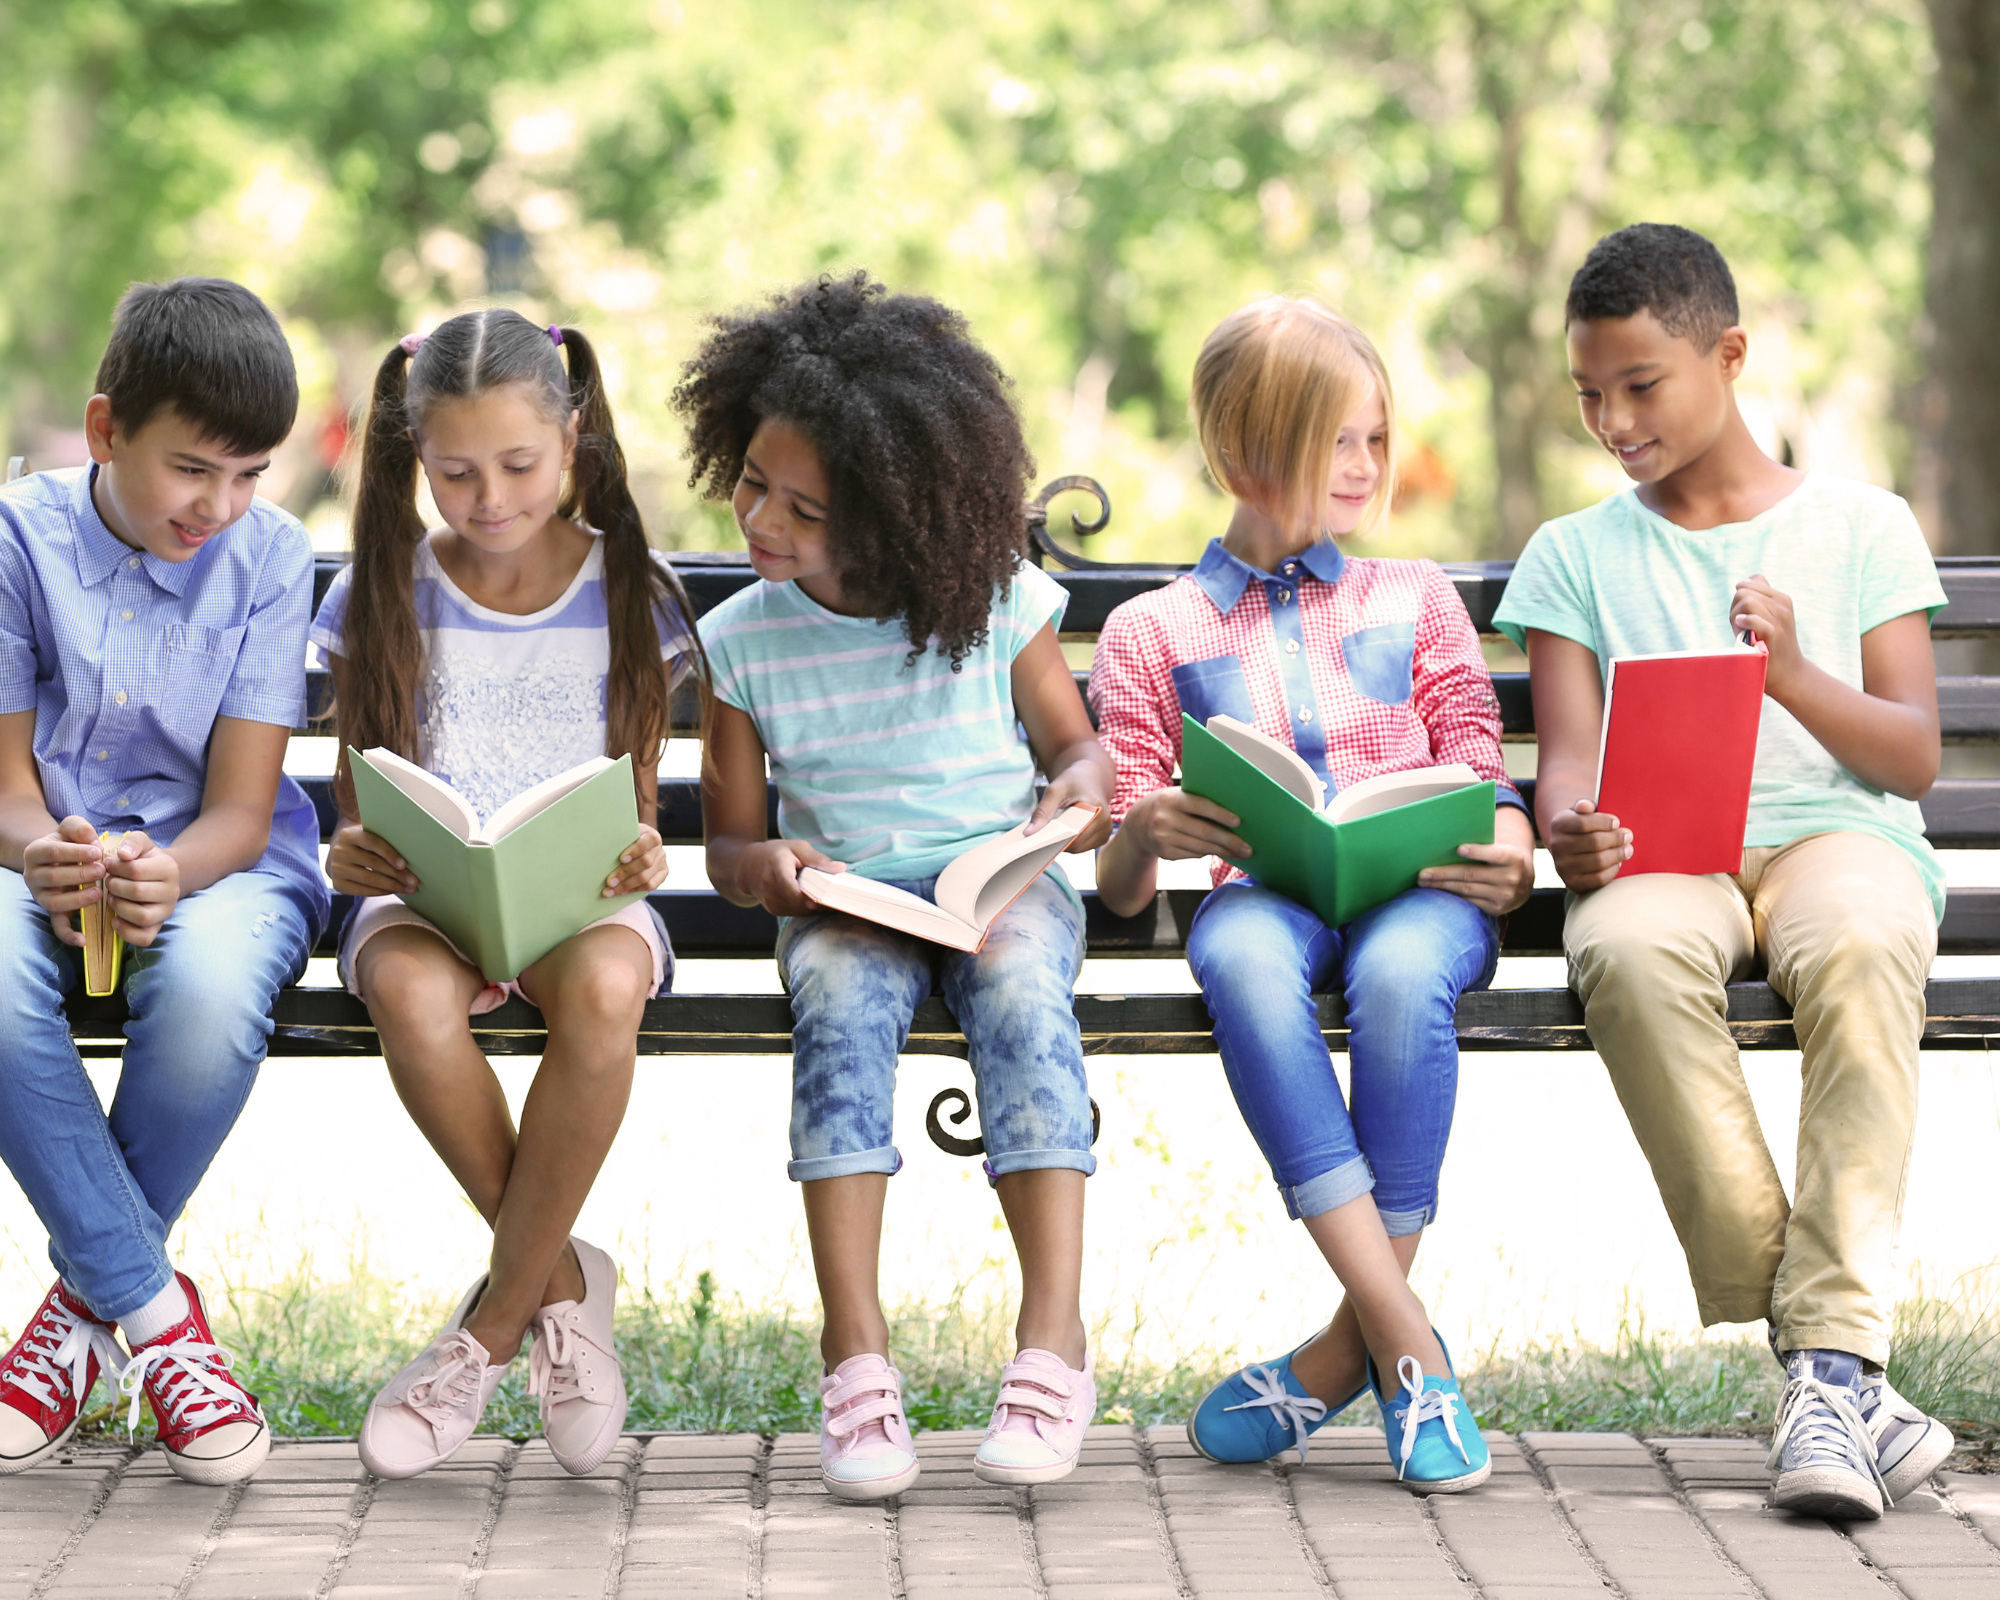 Five kids sit on bench with open books.